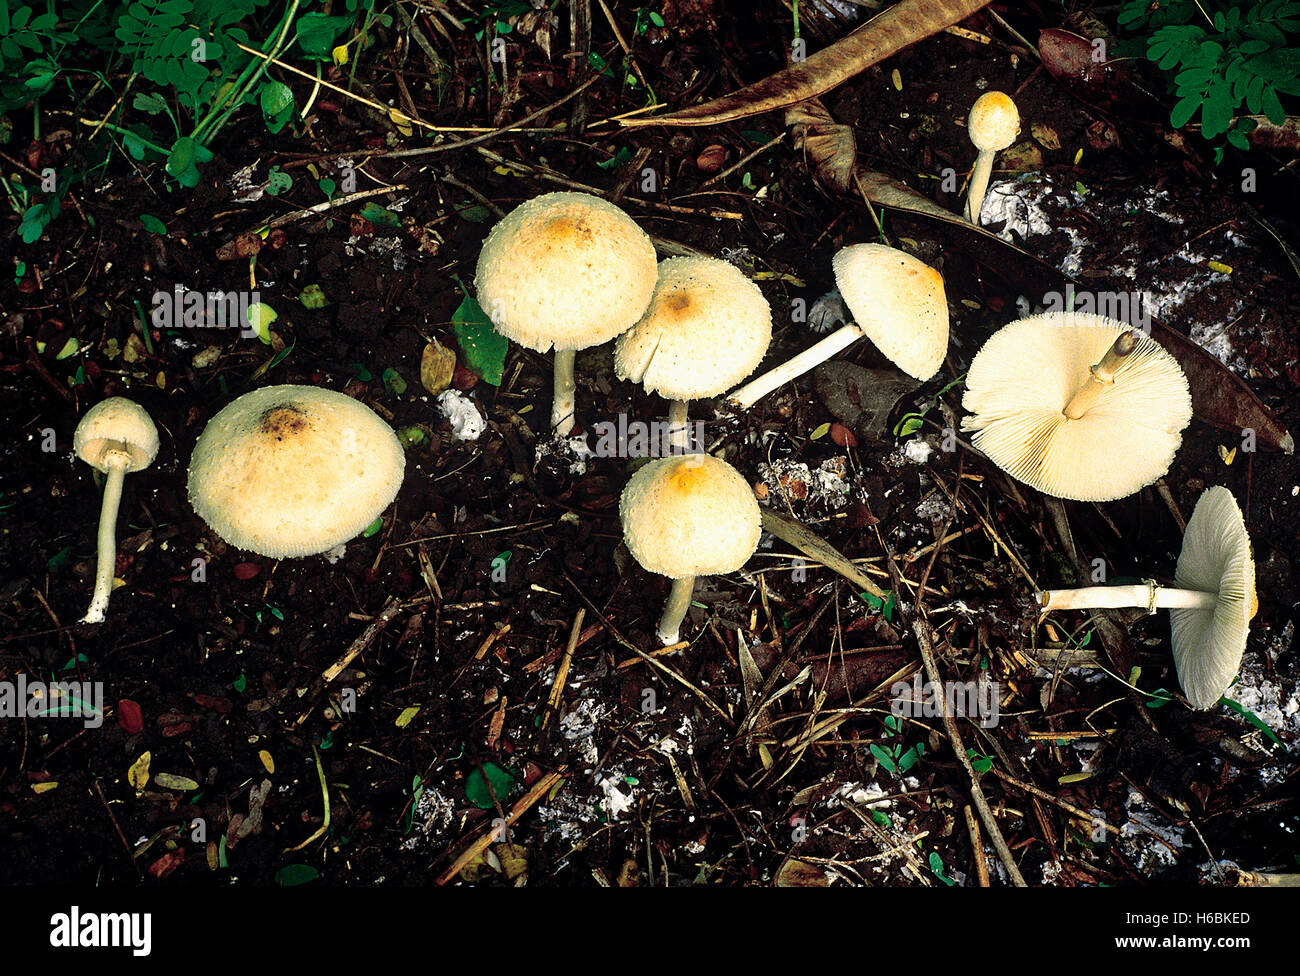 Class: Homobasidiomycetes. Series: Hymenomycetes. Order: Agaricales. A group of large mushrooms growing on soil rich in humus. Stock Photo